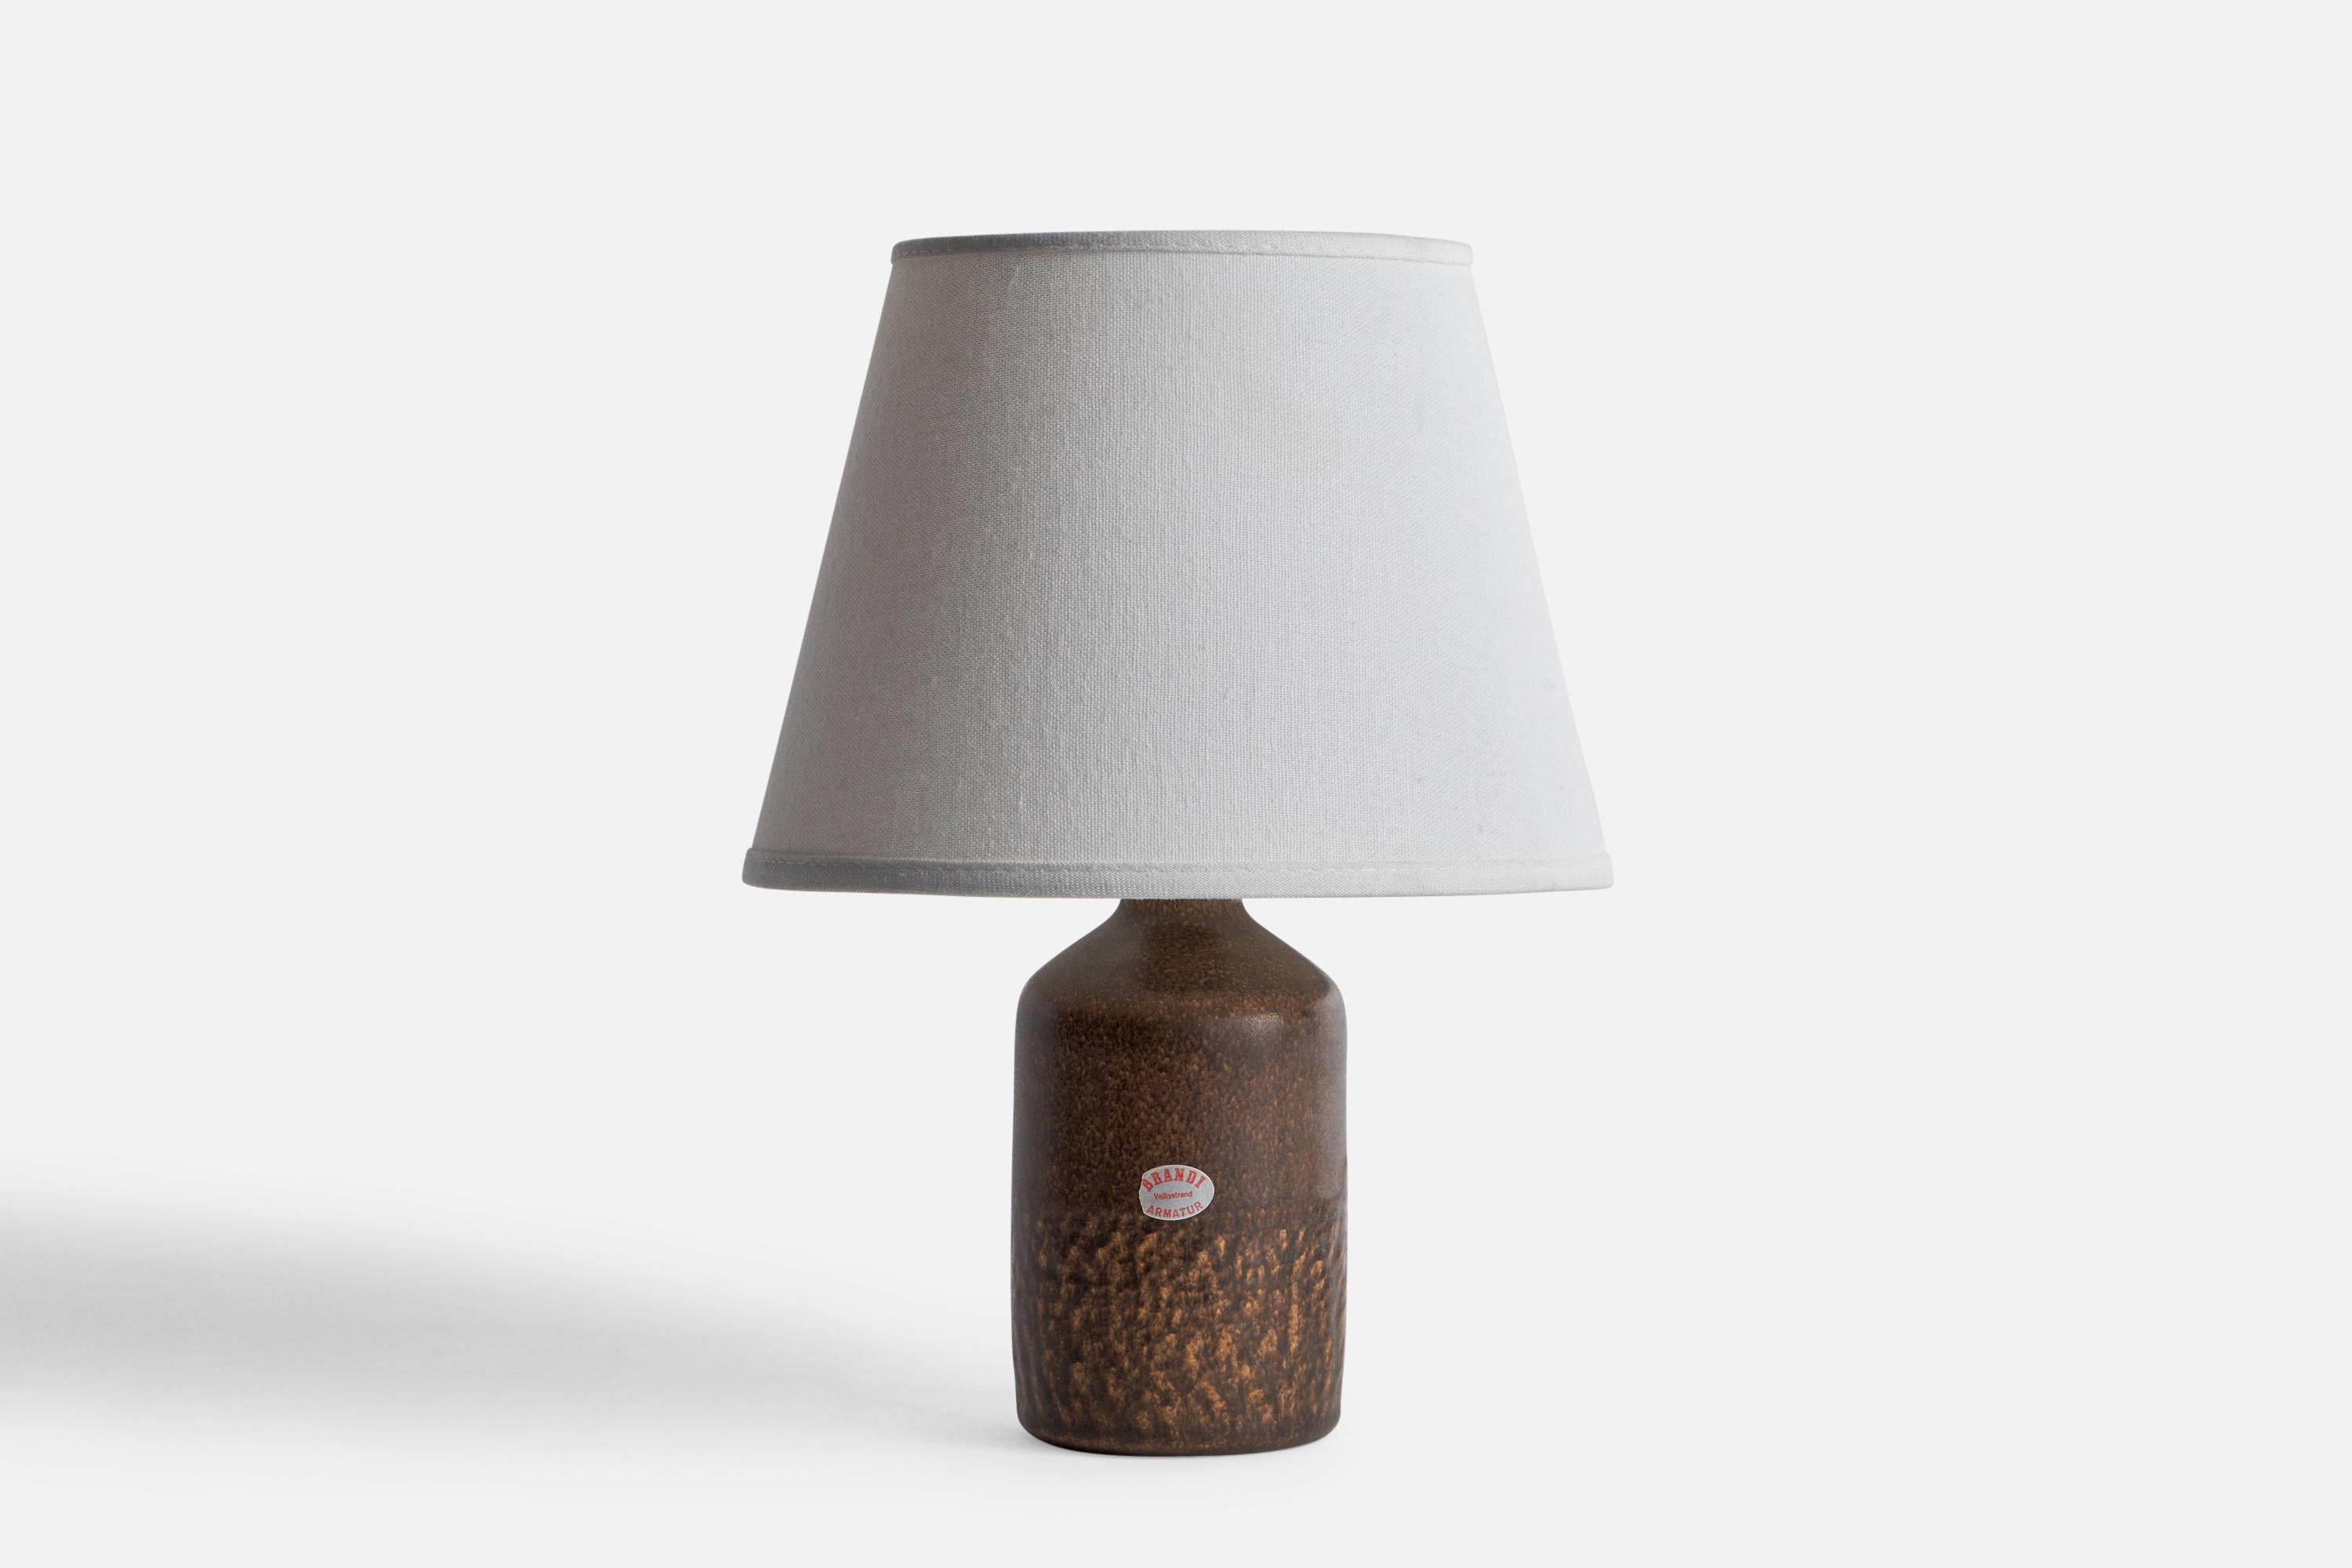 A brown-glazed table lamp designed and produced by Henry Brandi, Vejbystrand, Sweden, 1960s.

Dimensions of Lamp (inches): 8” H x 3.1” Diameter
Dimensions of Shade (inches): 3” Top Diameter x 5.75” Bottom Diameter x 4.5” H
Dimensions of Lamp with